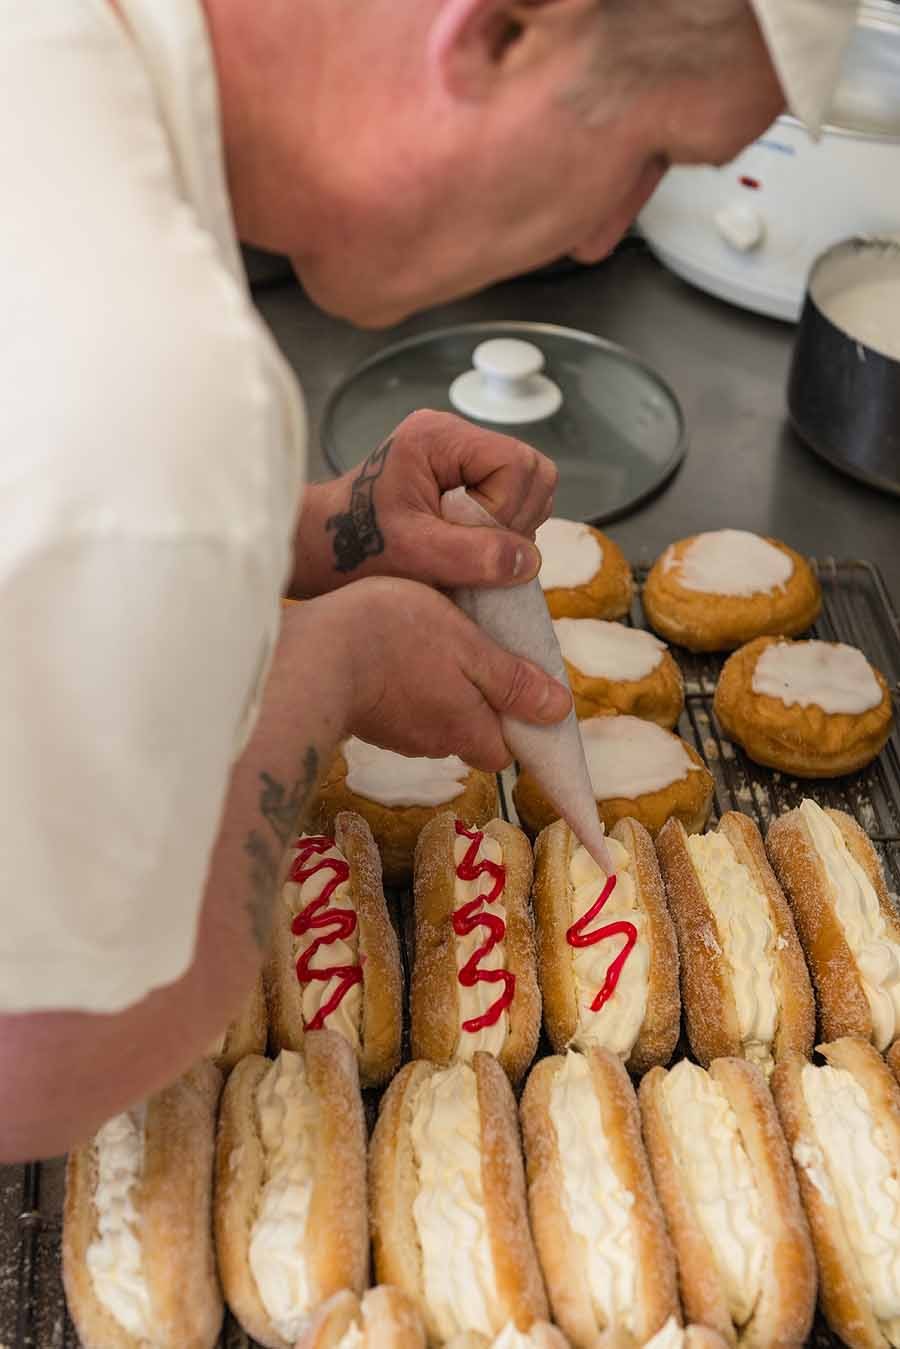 Careful work and steady hands at the cream finger station.